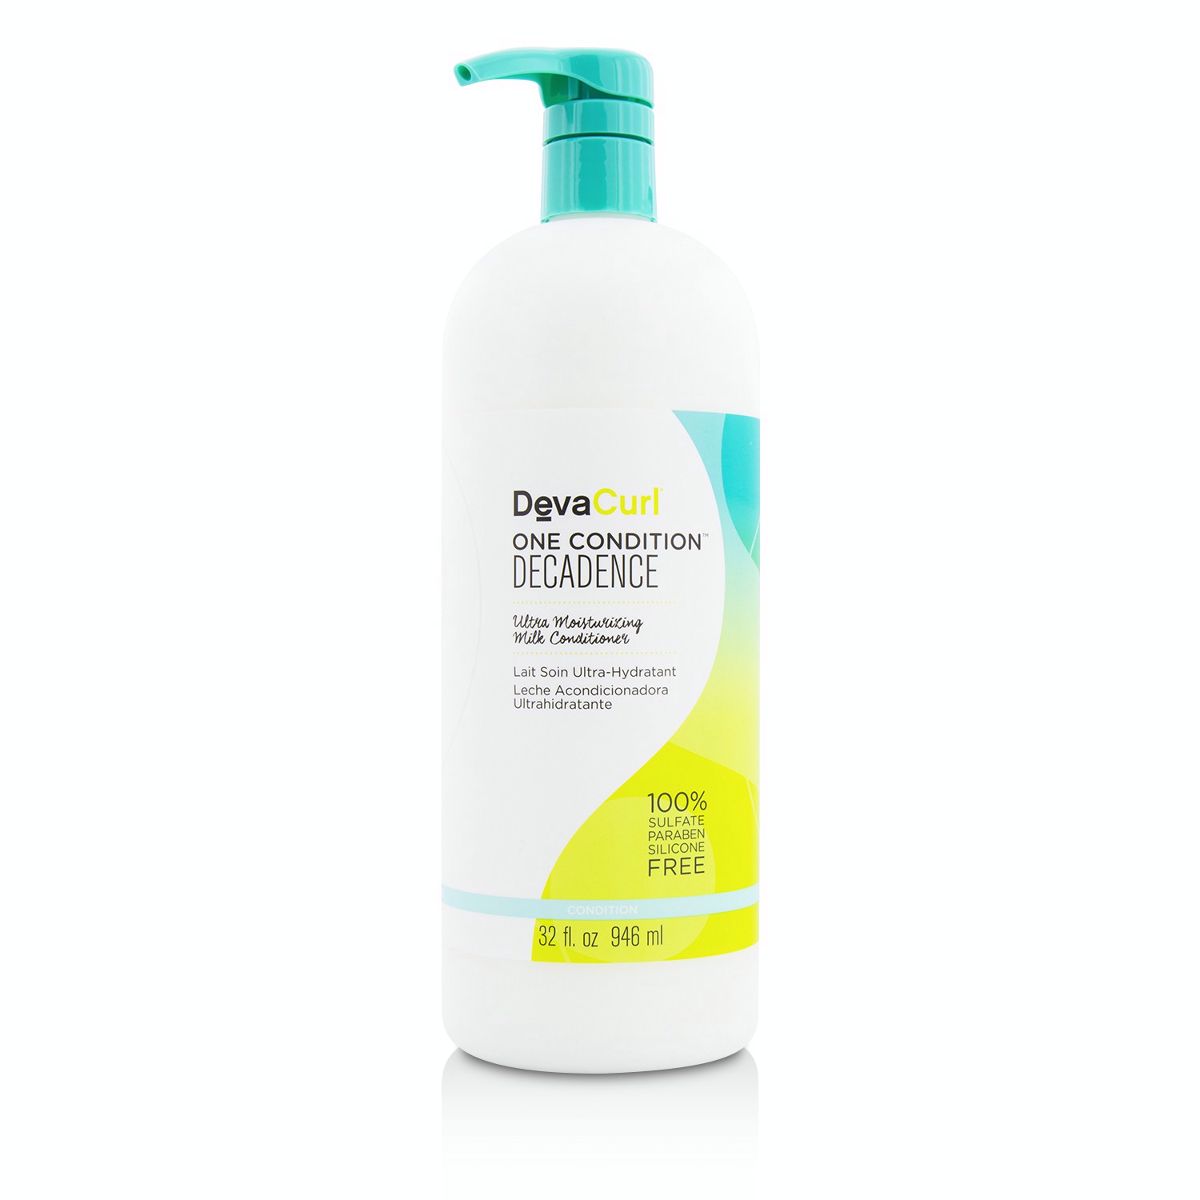 One Condition Decadence (Ultra Moisturizing Milk Conditioner - For Super Curly Hair) DevaCurl Image